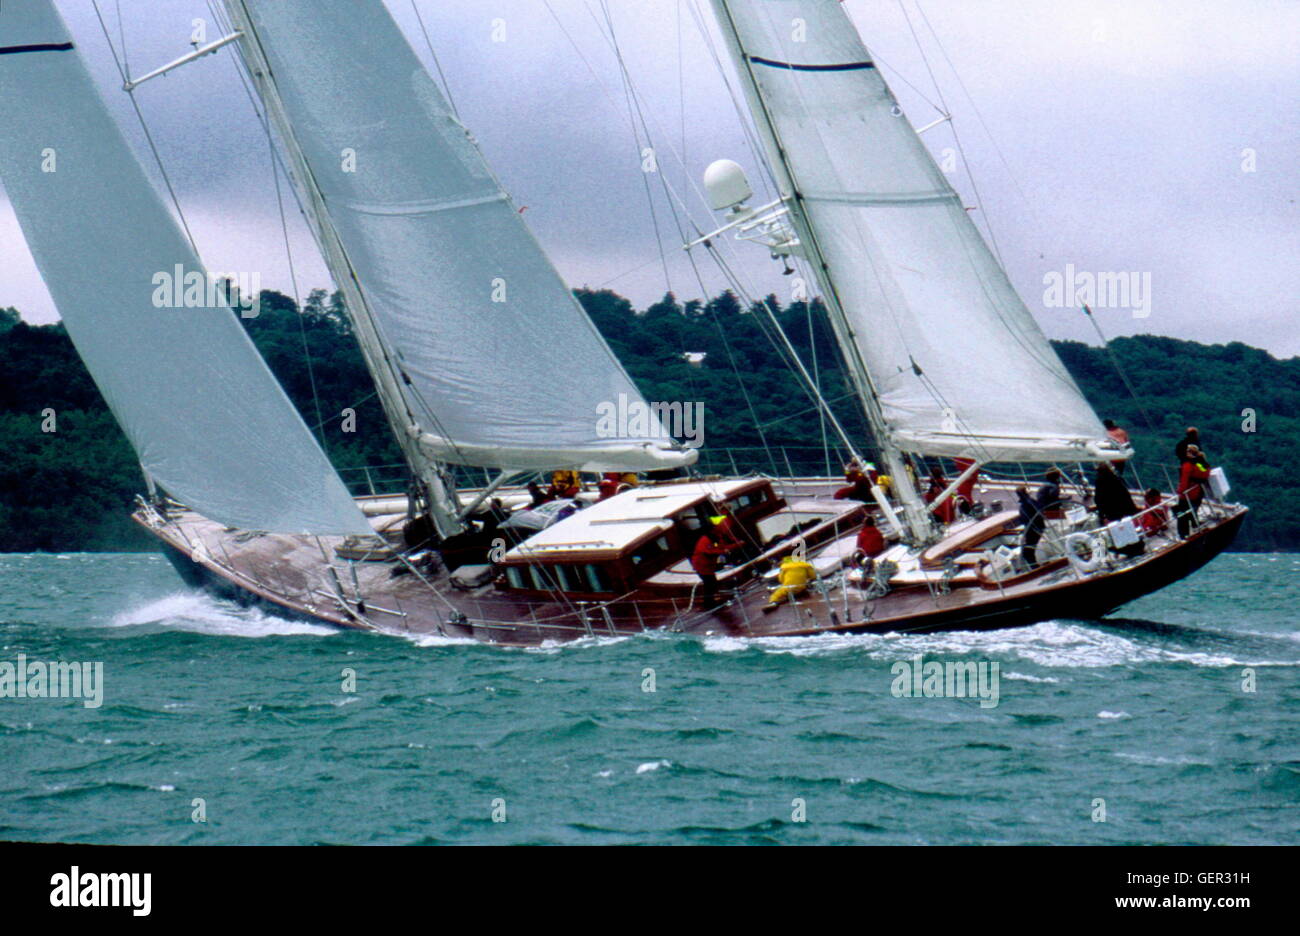 AJAXNETPHOTO. 20TH AUGUST, 2001. COWES. I.O.W. ENGLAND. - AMERICA'S CUP SILVER JUBILEE - THE YACHT REBECCA RACING IN THE SOLENT SURING THE RE-ENACTED AMERICA'S CUP JUBILEE REGATTA.  PHOTO: JONATHAN EASTLAND/AJAX.  REF: 001273. Stock Photo